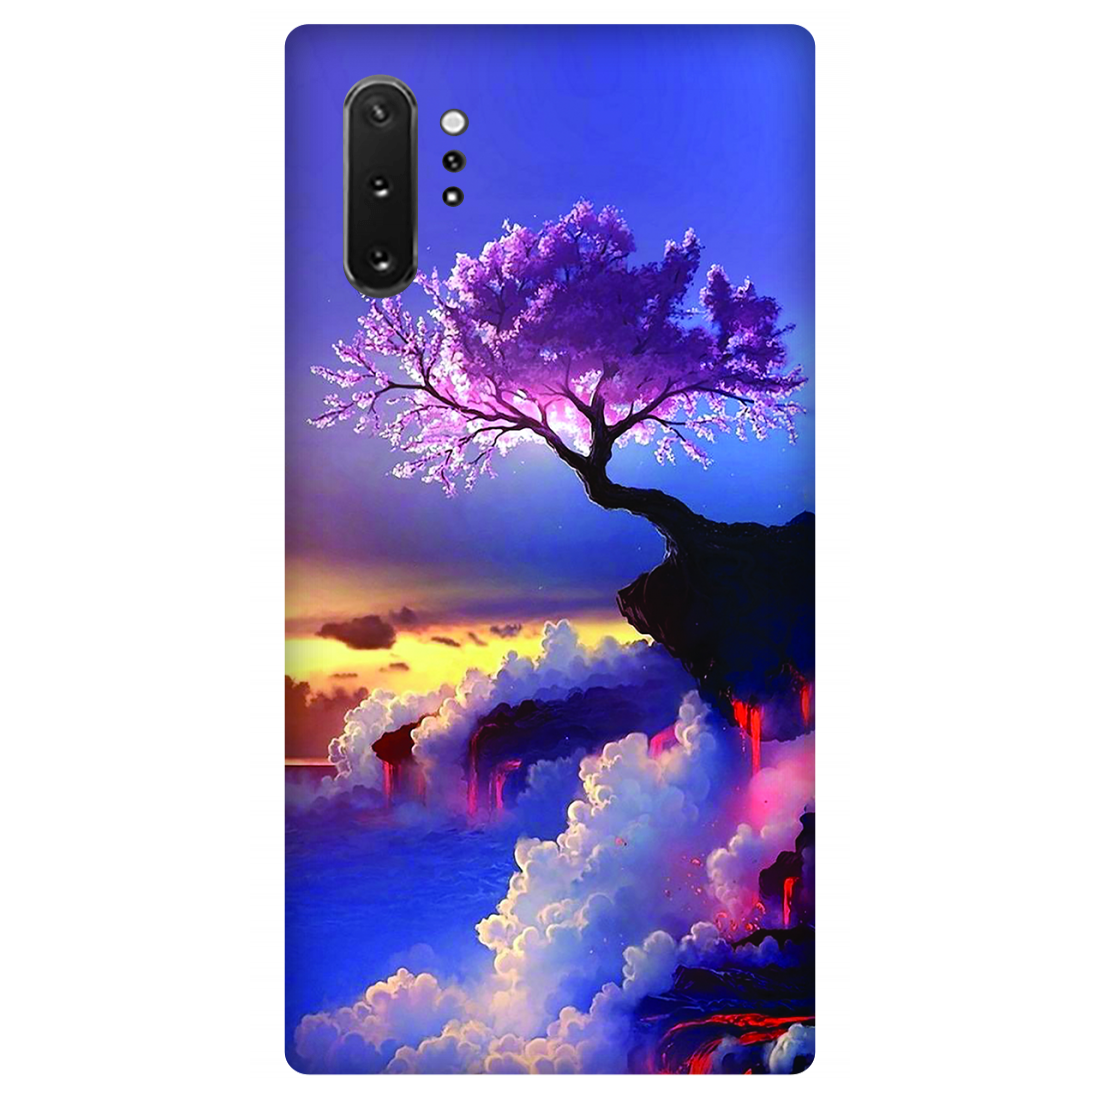 Ethereal Sunset Blossoms Case Samsung Galaxy Note 10 Plus